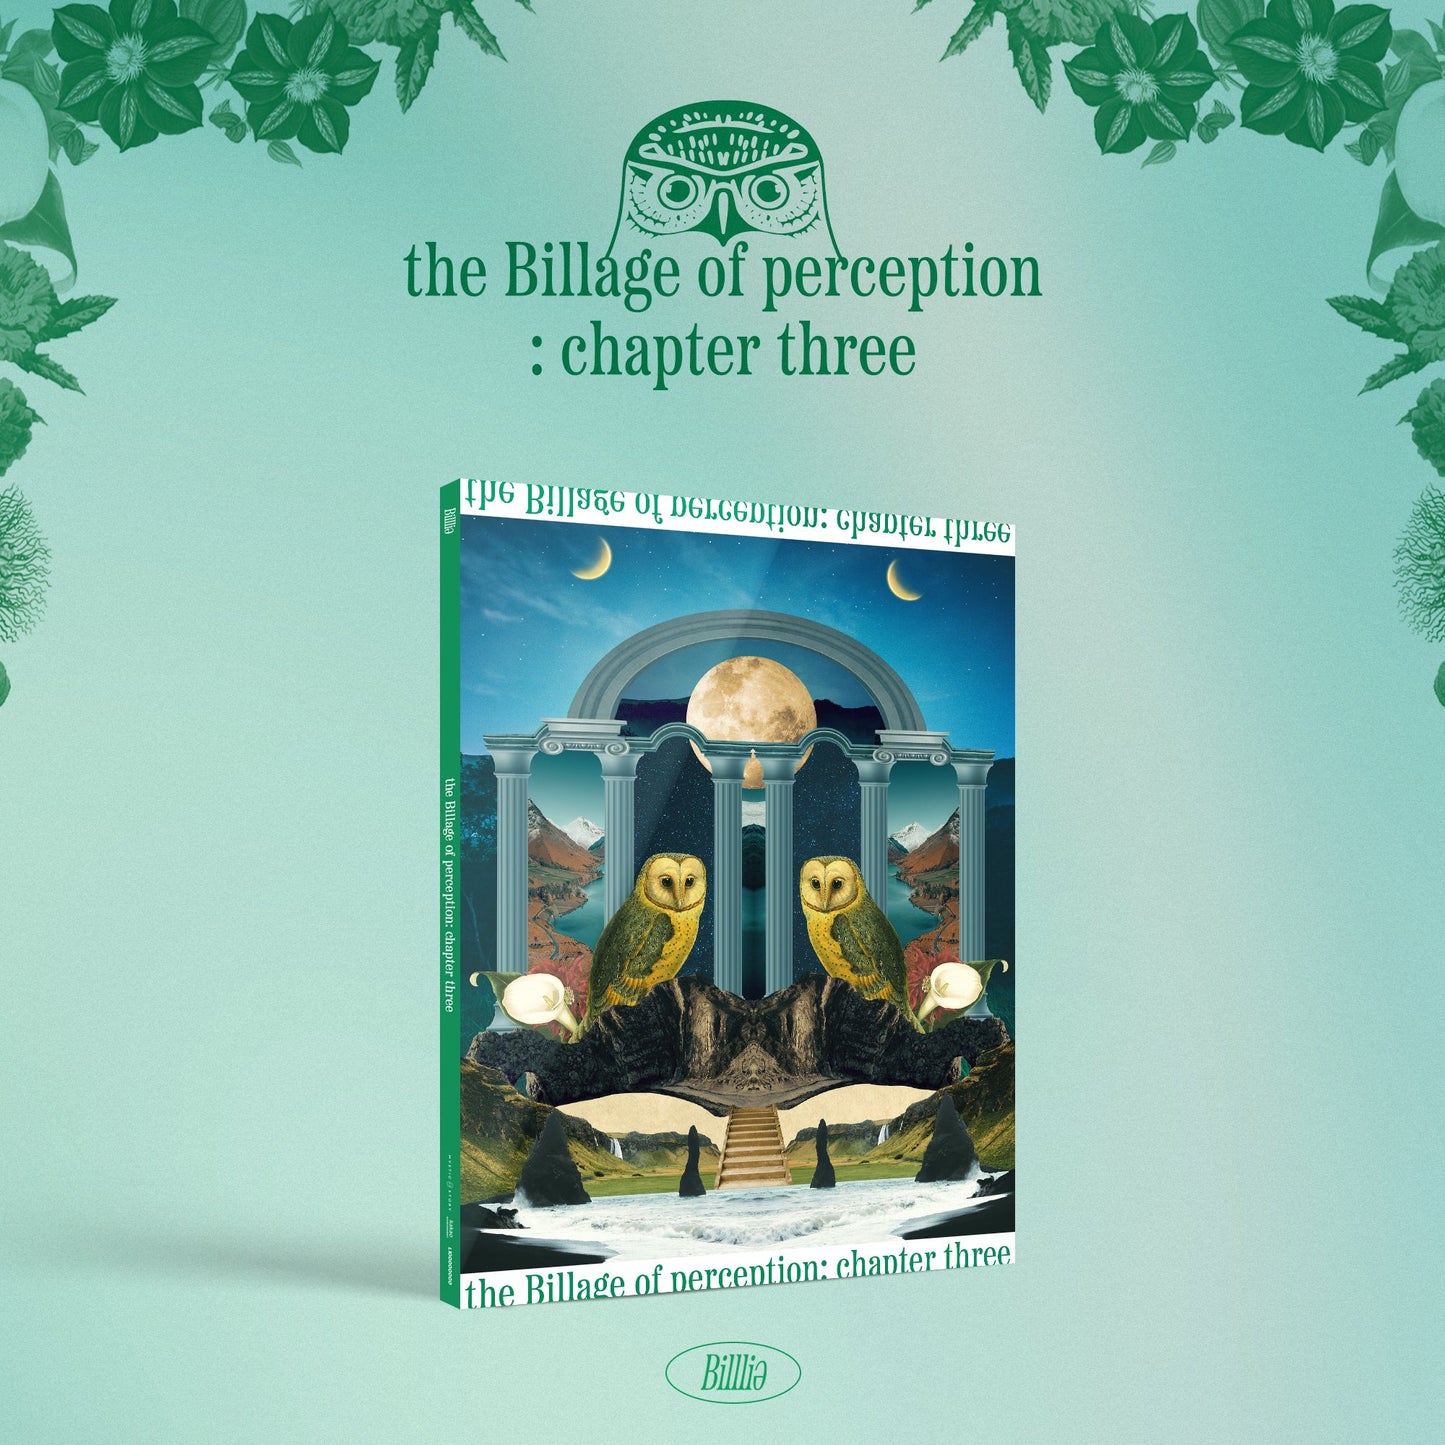 BILLLIE 4TH MINI ALBUM 'THE BILLAGE OF PERCEPTION: CHAPTER THREE' 11:11 PM COLLECTION COVER